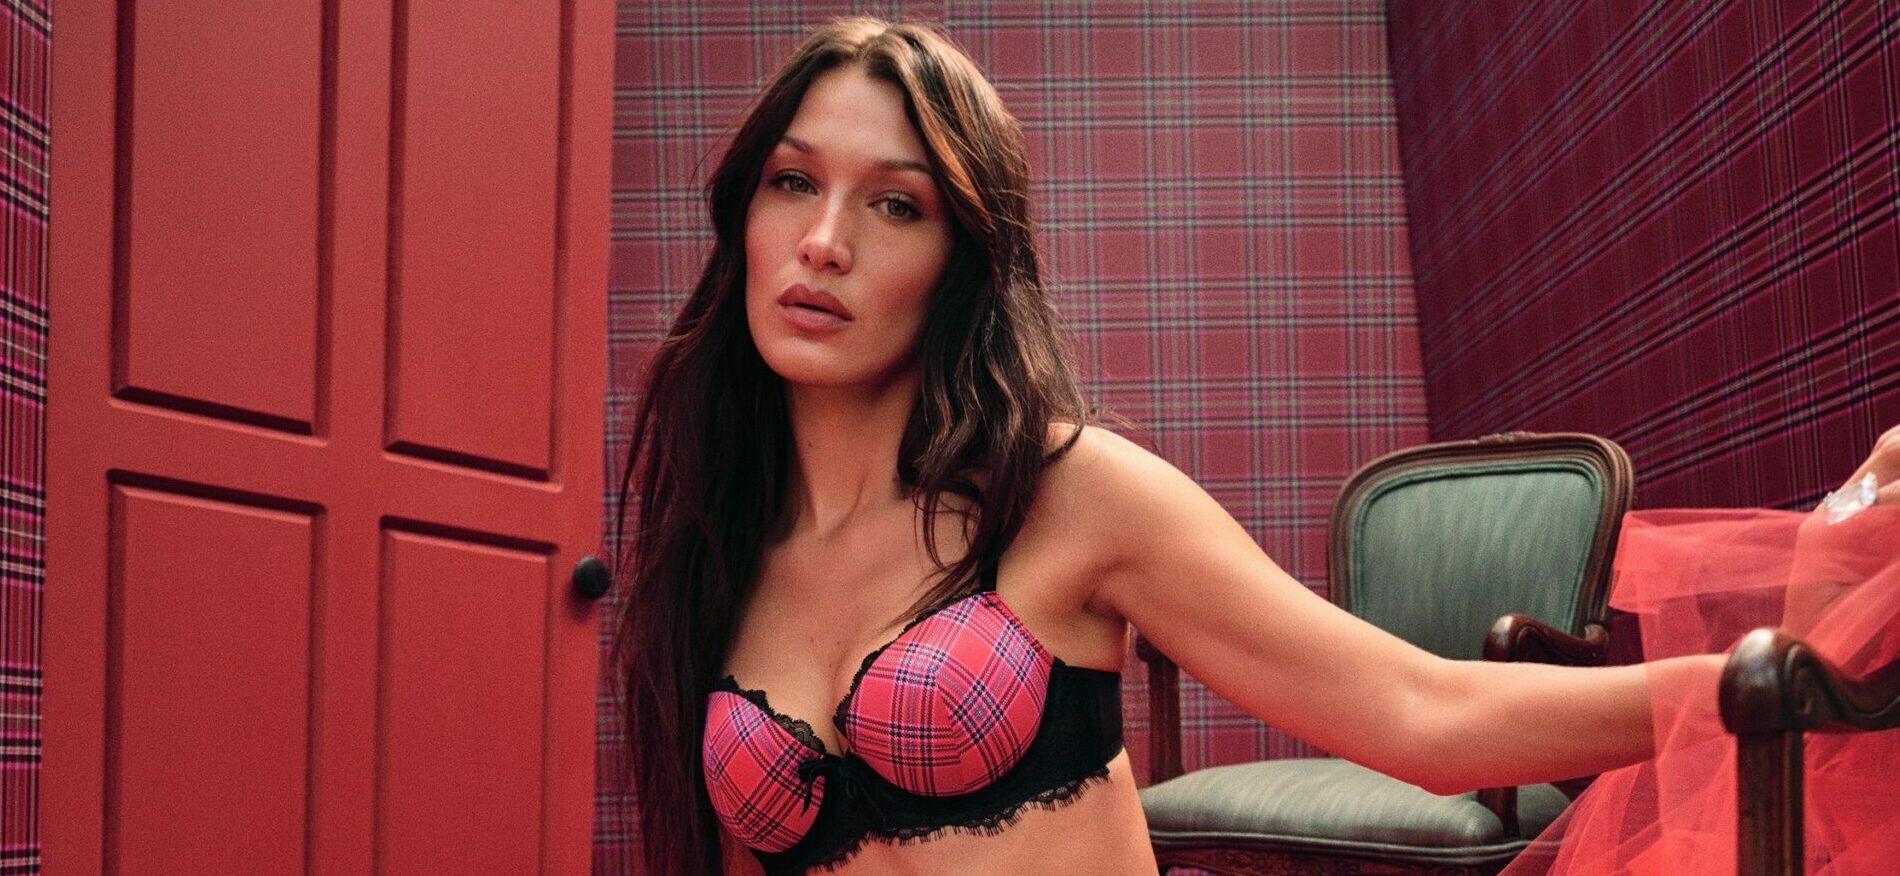 Bella Hadid Opened up About Her Ongoing Struggle With Mental Health in Her  Latest Interview